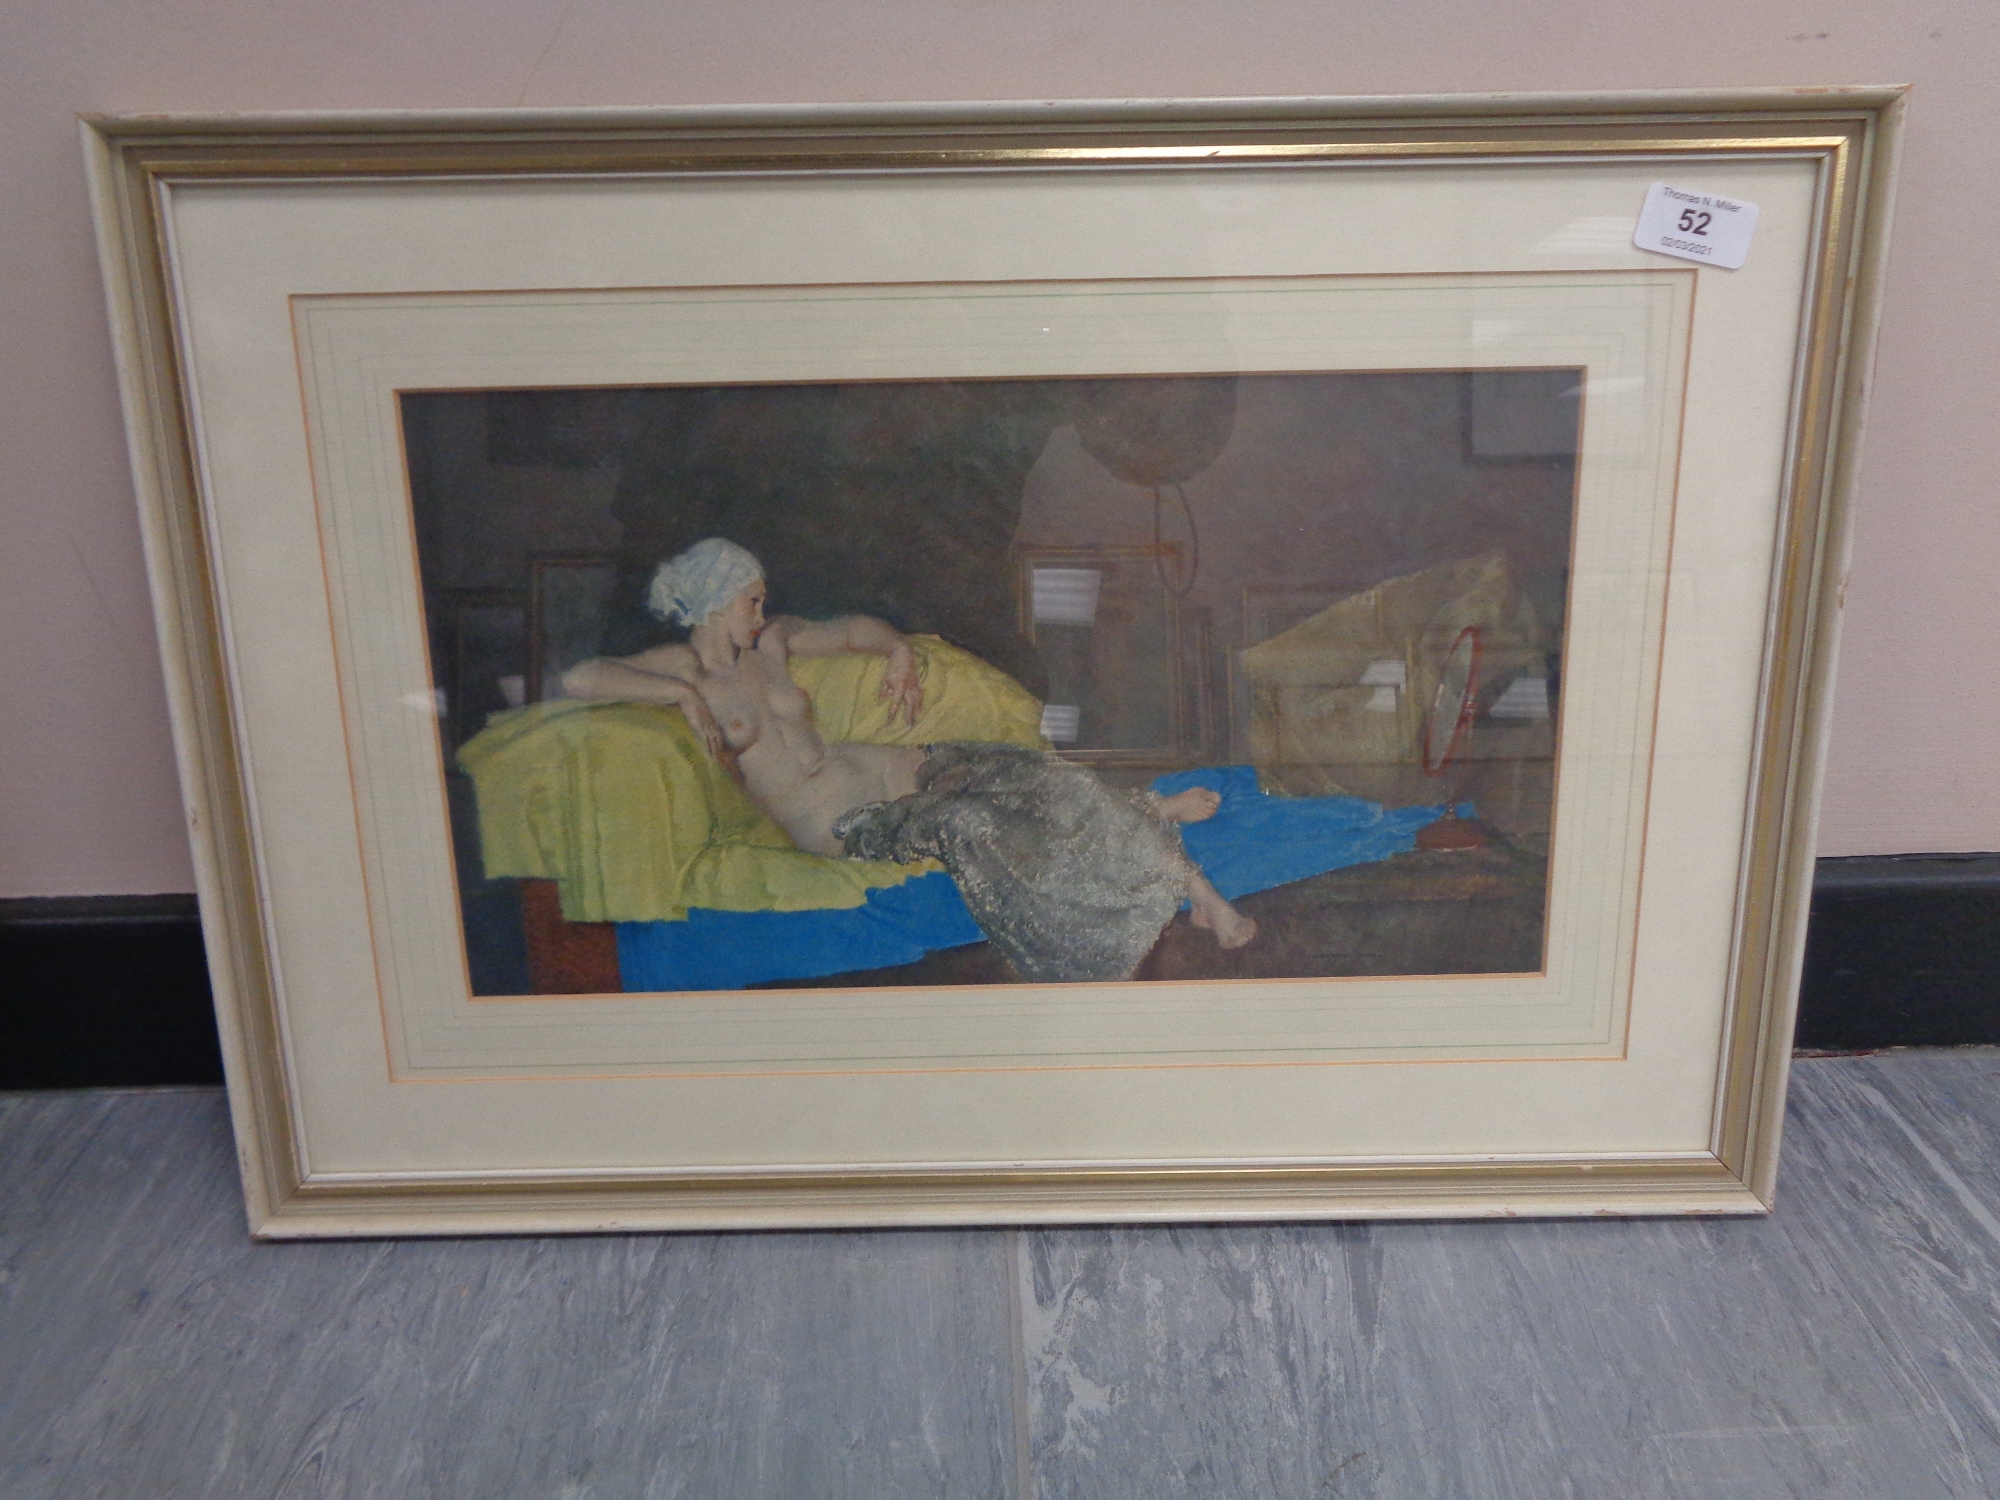 After Sir William Russell Flint : Reflection, colour print, 22 cm x 40 cm, framed.